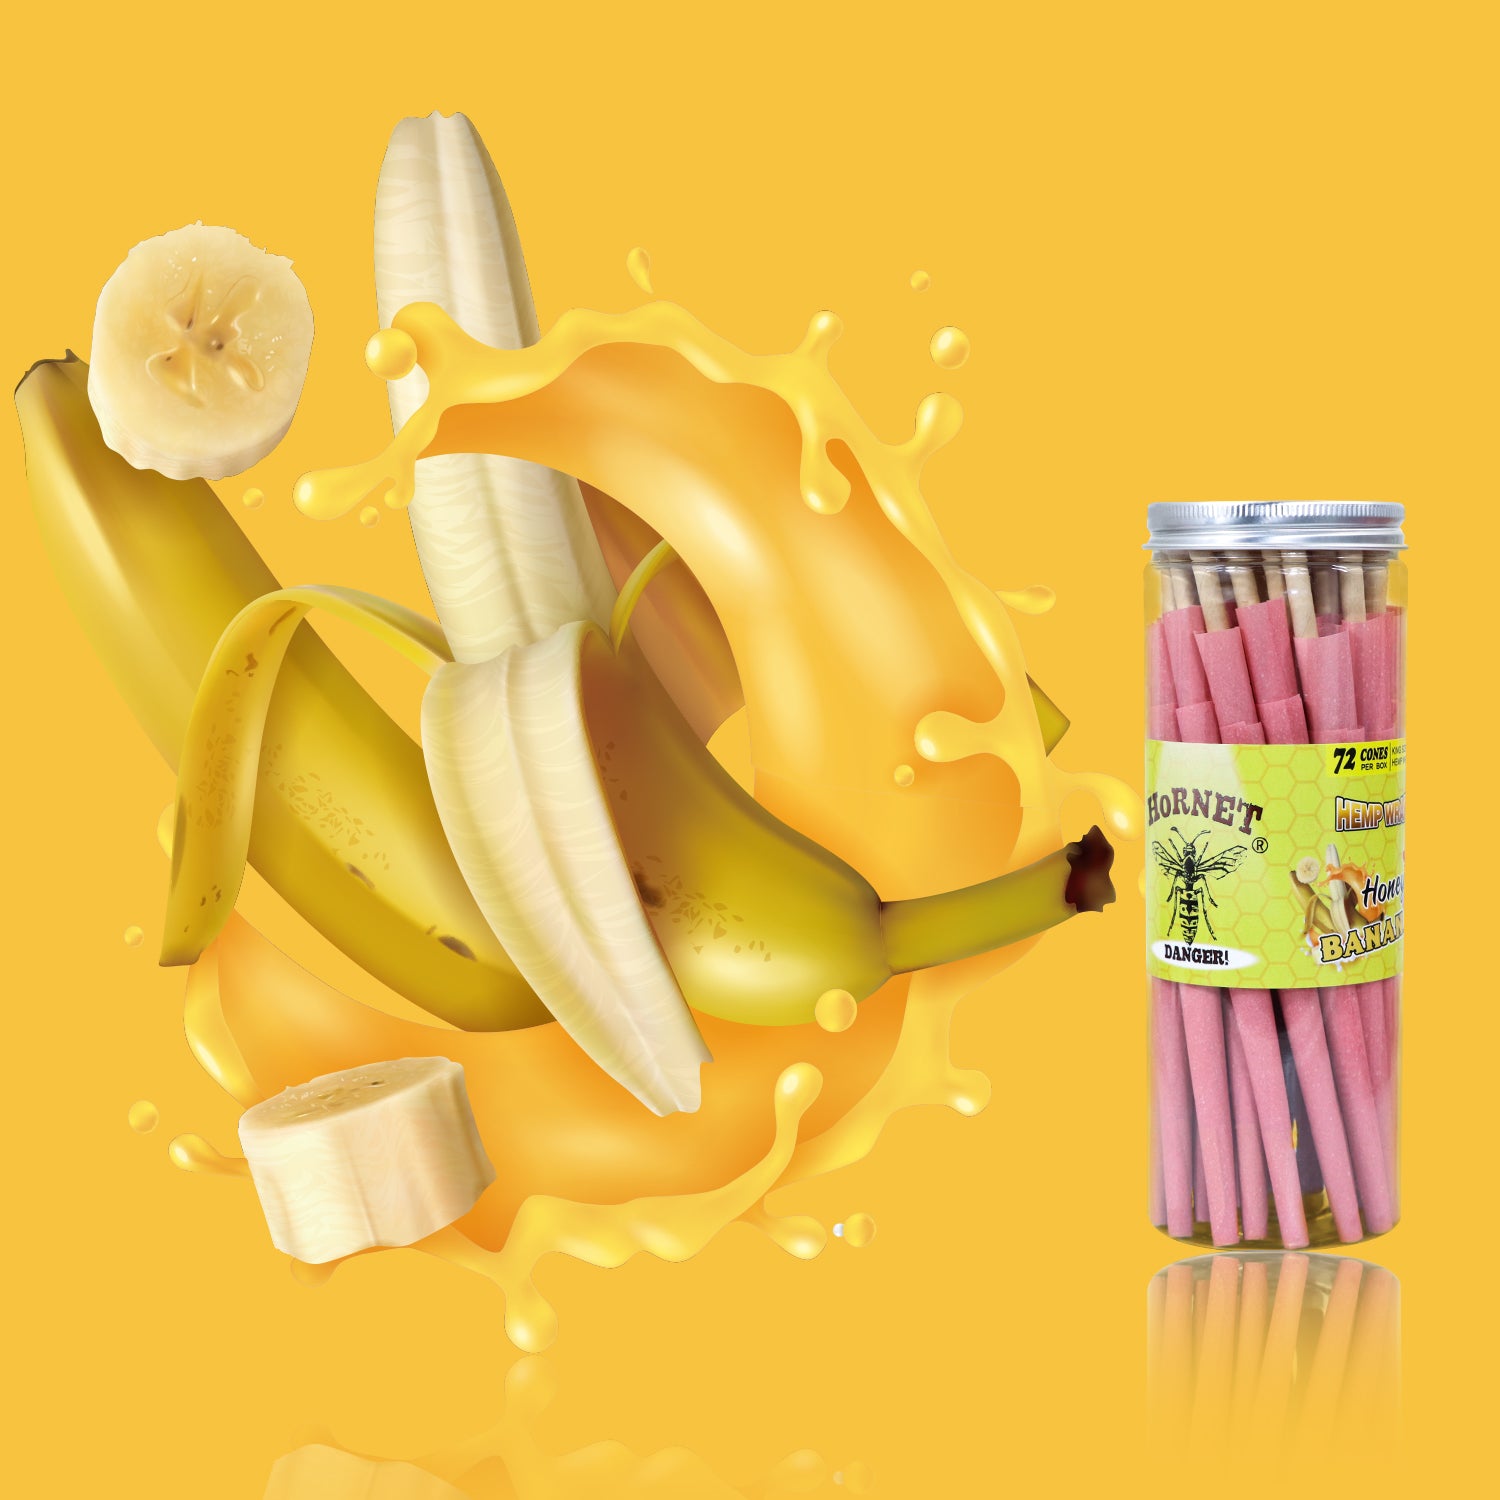 HORNET Banana Flavored Pink Pre Rolled Cones, King Size Pre Rolled Rolling Paper with tips, Slow Burning Rolling Cones & load, 72 PCS / Jar